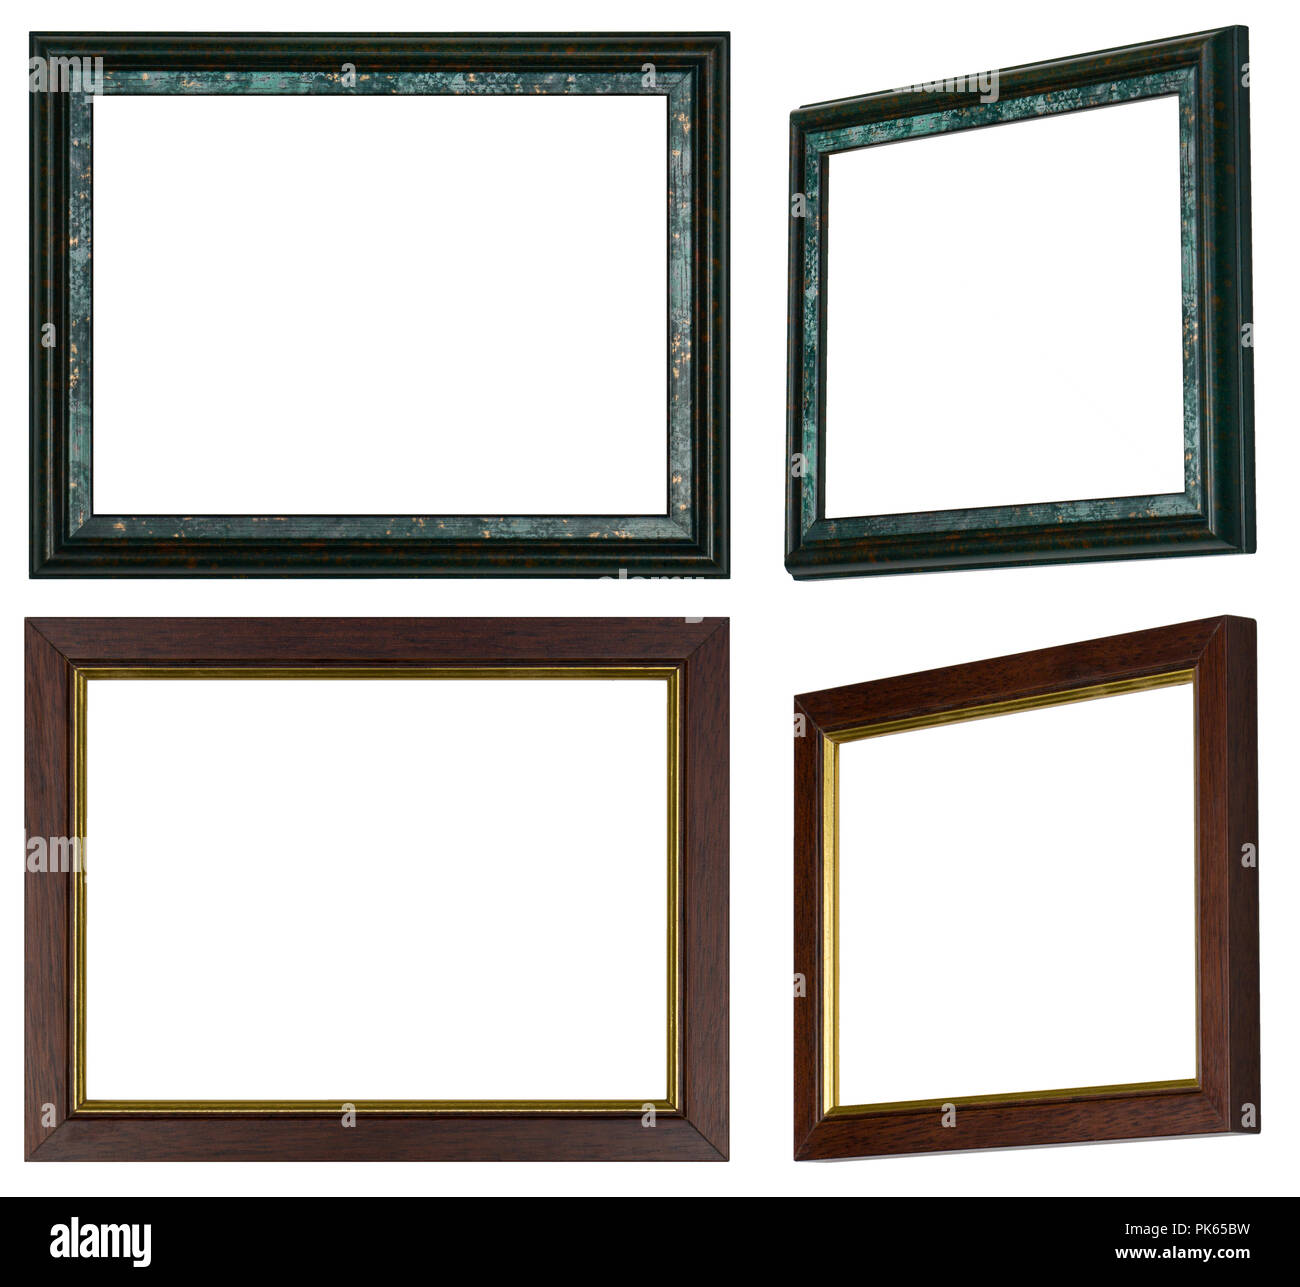 Diagonal frames Cut Out Stock Images & Pictures - Alamy